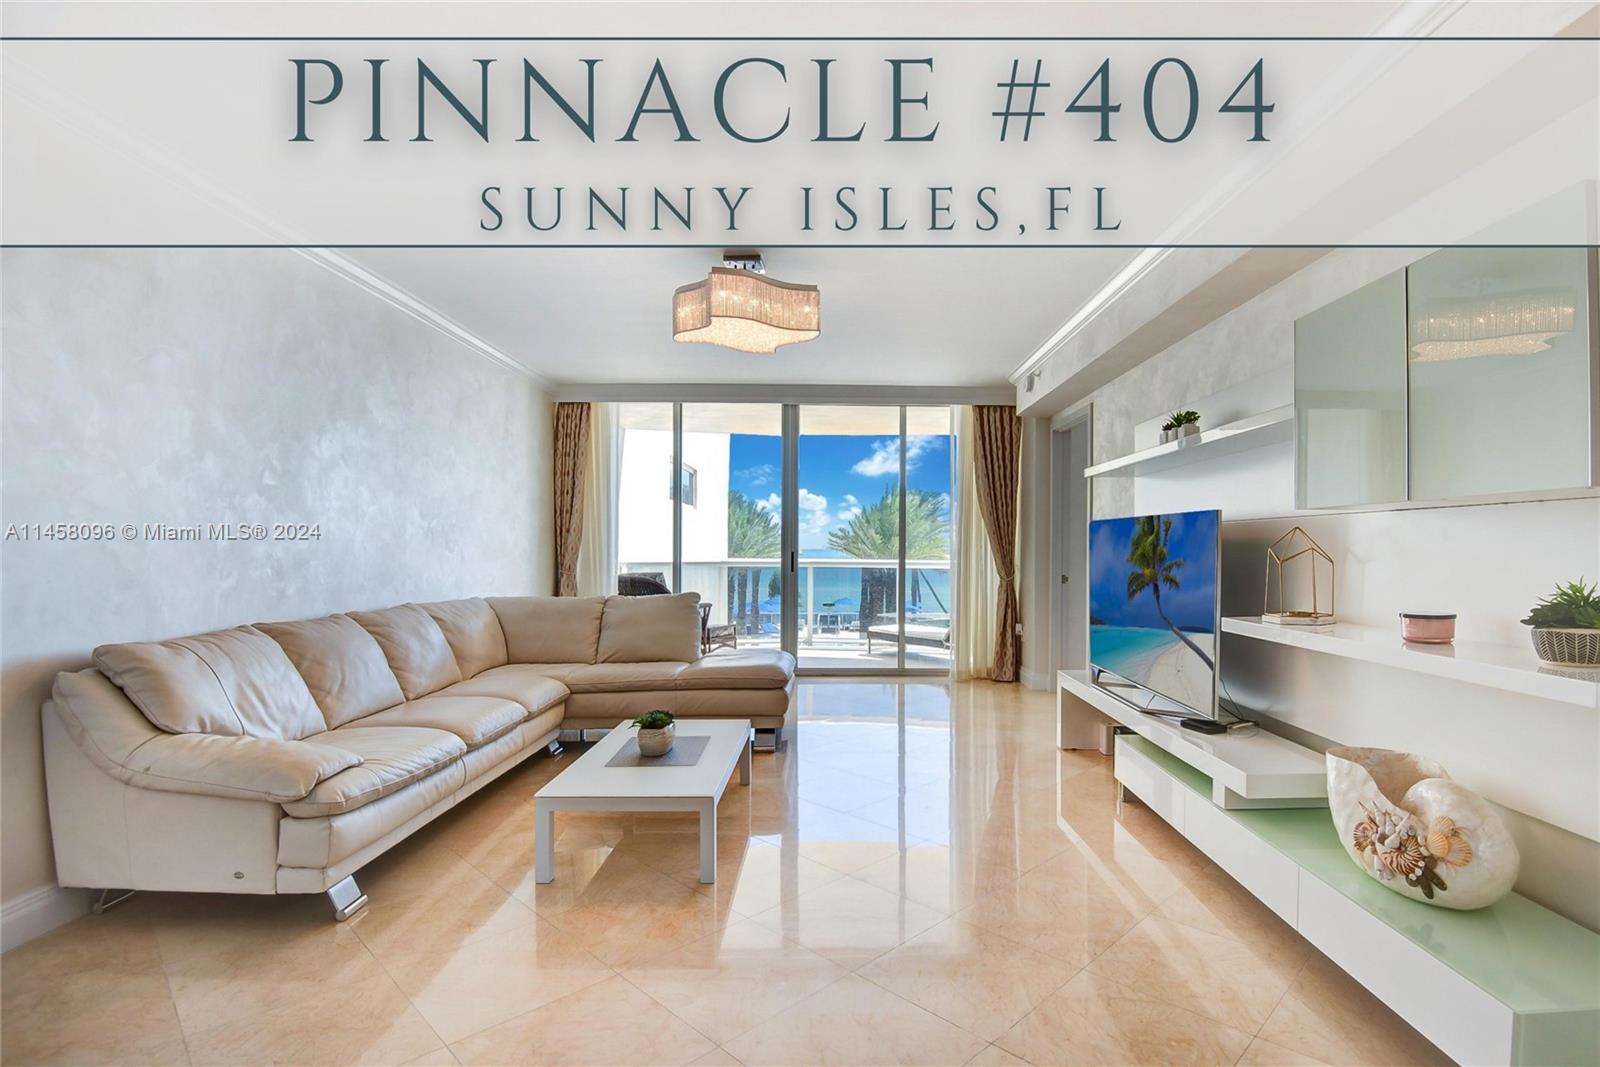 Beautiful and luxurious direct oceanfront residence with spectacular views at the acclaimed Pinnacle in Sunny Isles! Newly remodeled and fully furnished with modern decor and top of the line furniture and decoration! Flow-through layout with floor to ceiling glass and large balcony overlooking the pool and the ocean. 

This 5 star building offers concierge, pool, jacuzzi, spa, gym, tennis court, beach service with towels and
lounge chairs and more! Within walking distance to all the shops and restaurants!